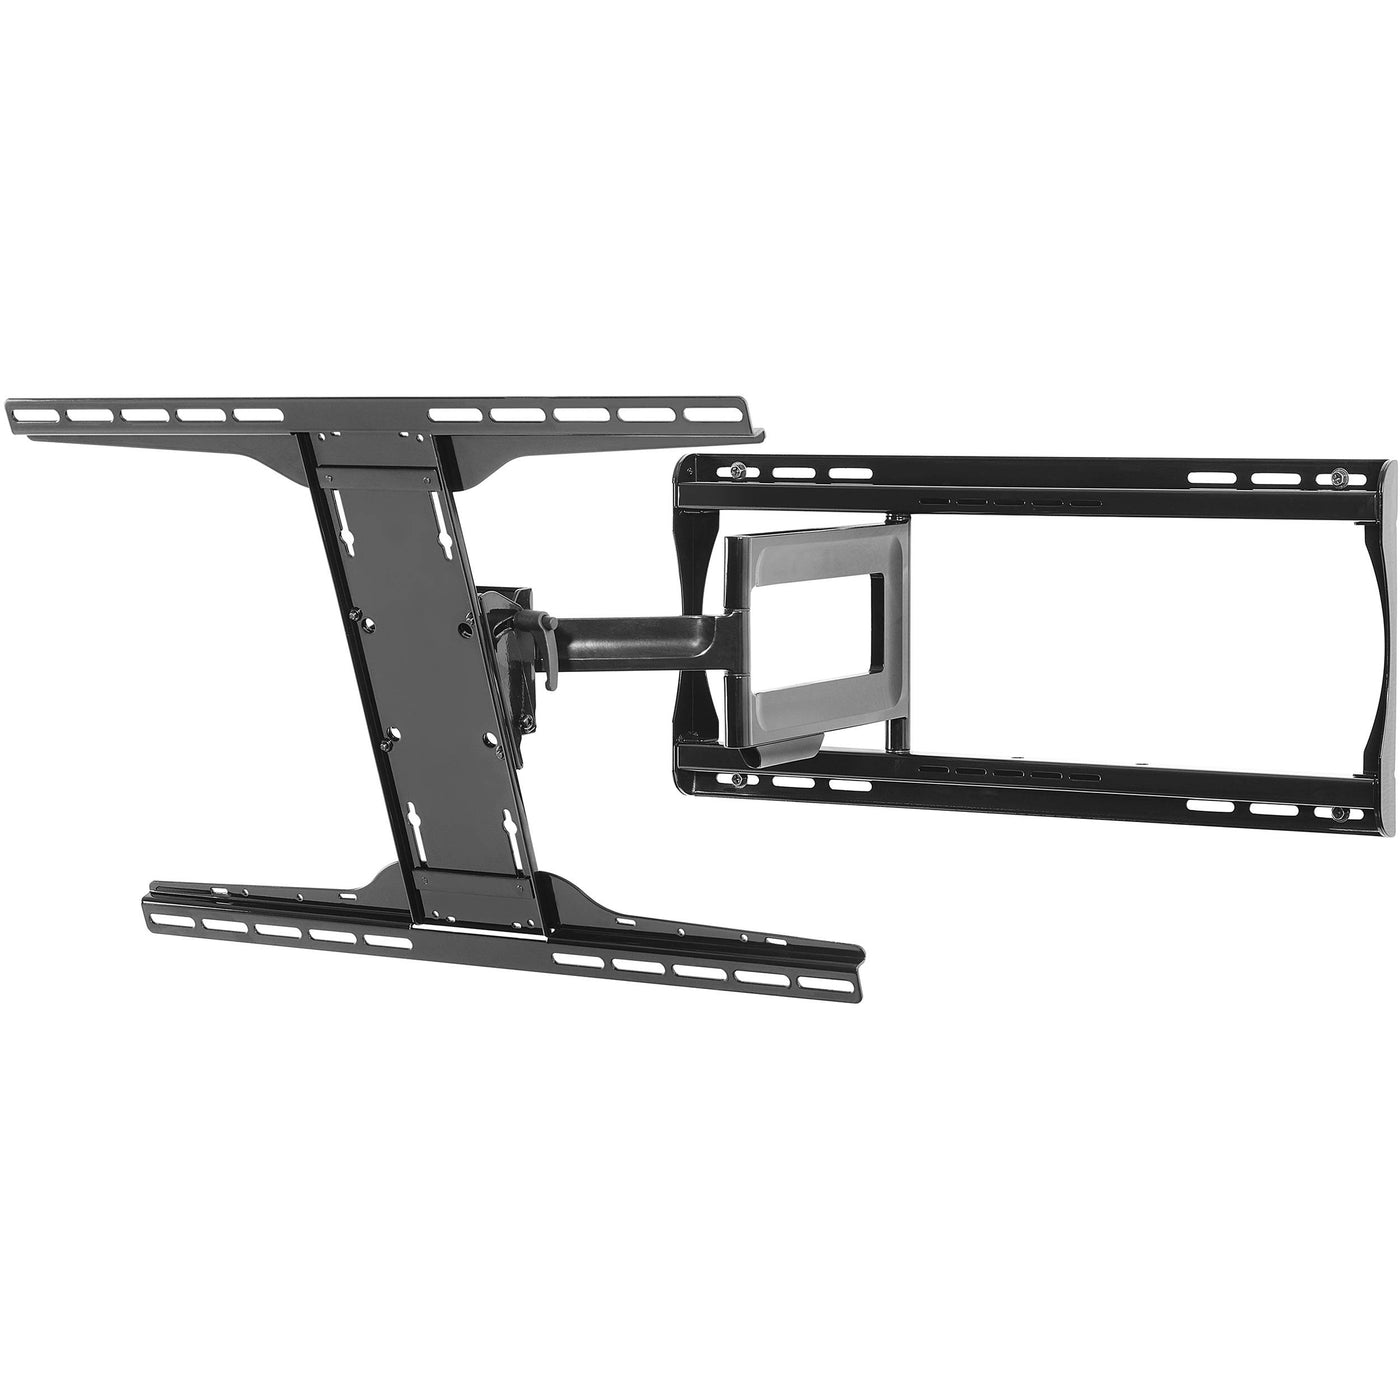 Peerless PA750 Paramount Articulating Wall Mount for Displays max 100lb; 39"-75"